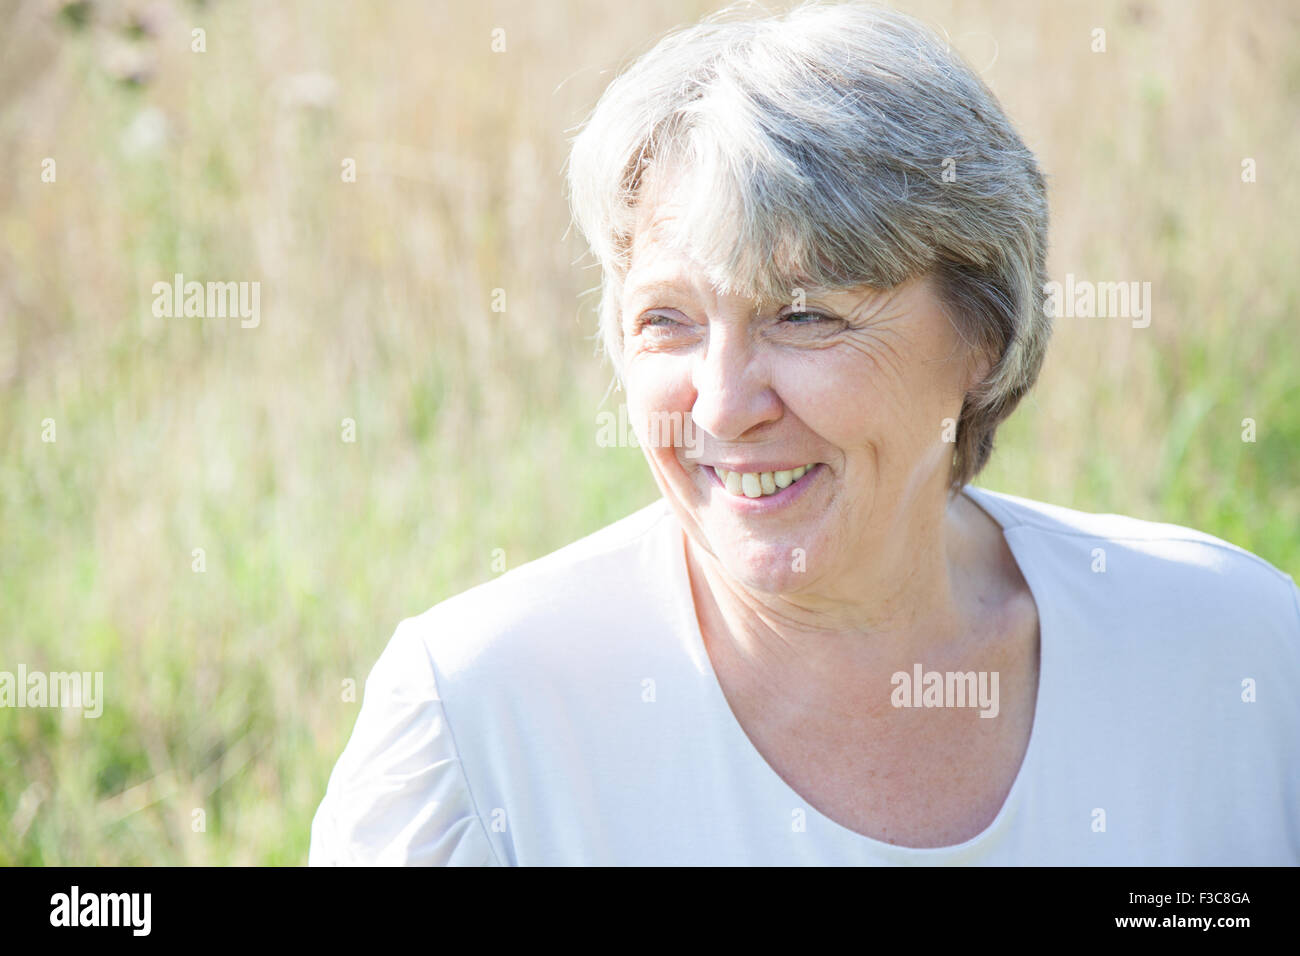 Old age woman smiling white being outside Stock Photo